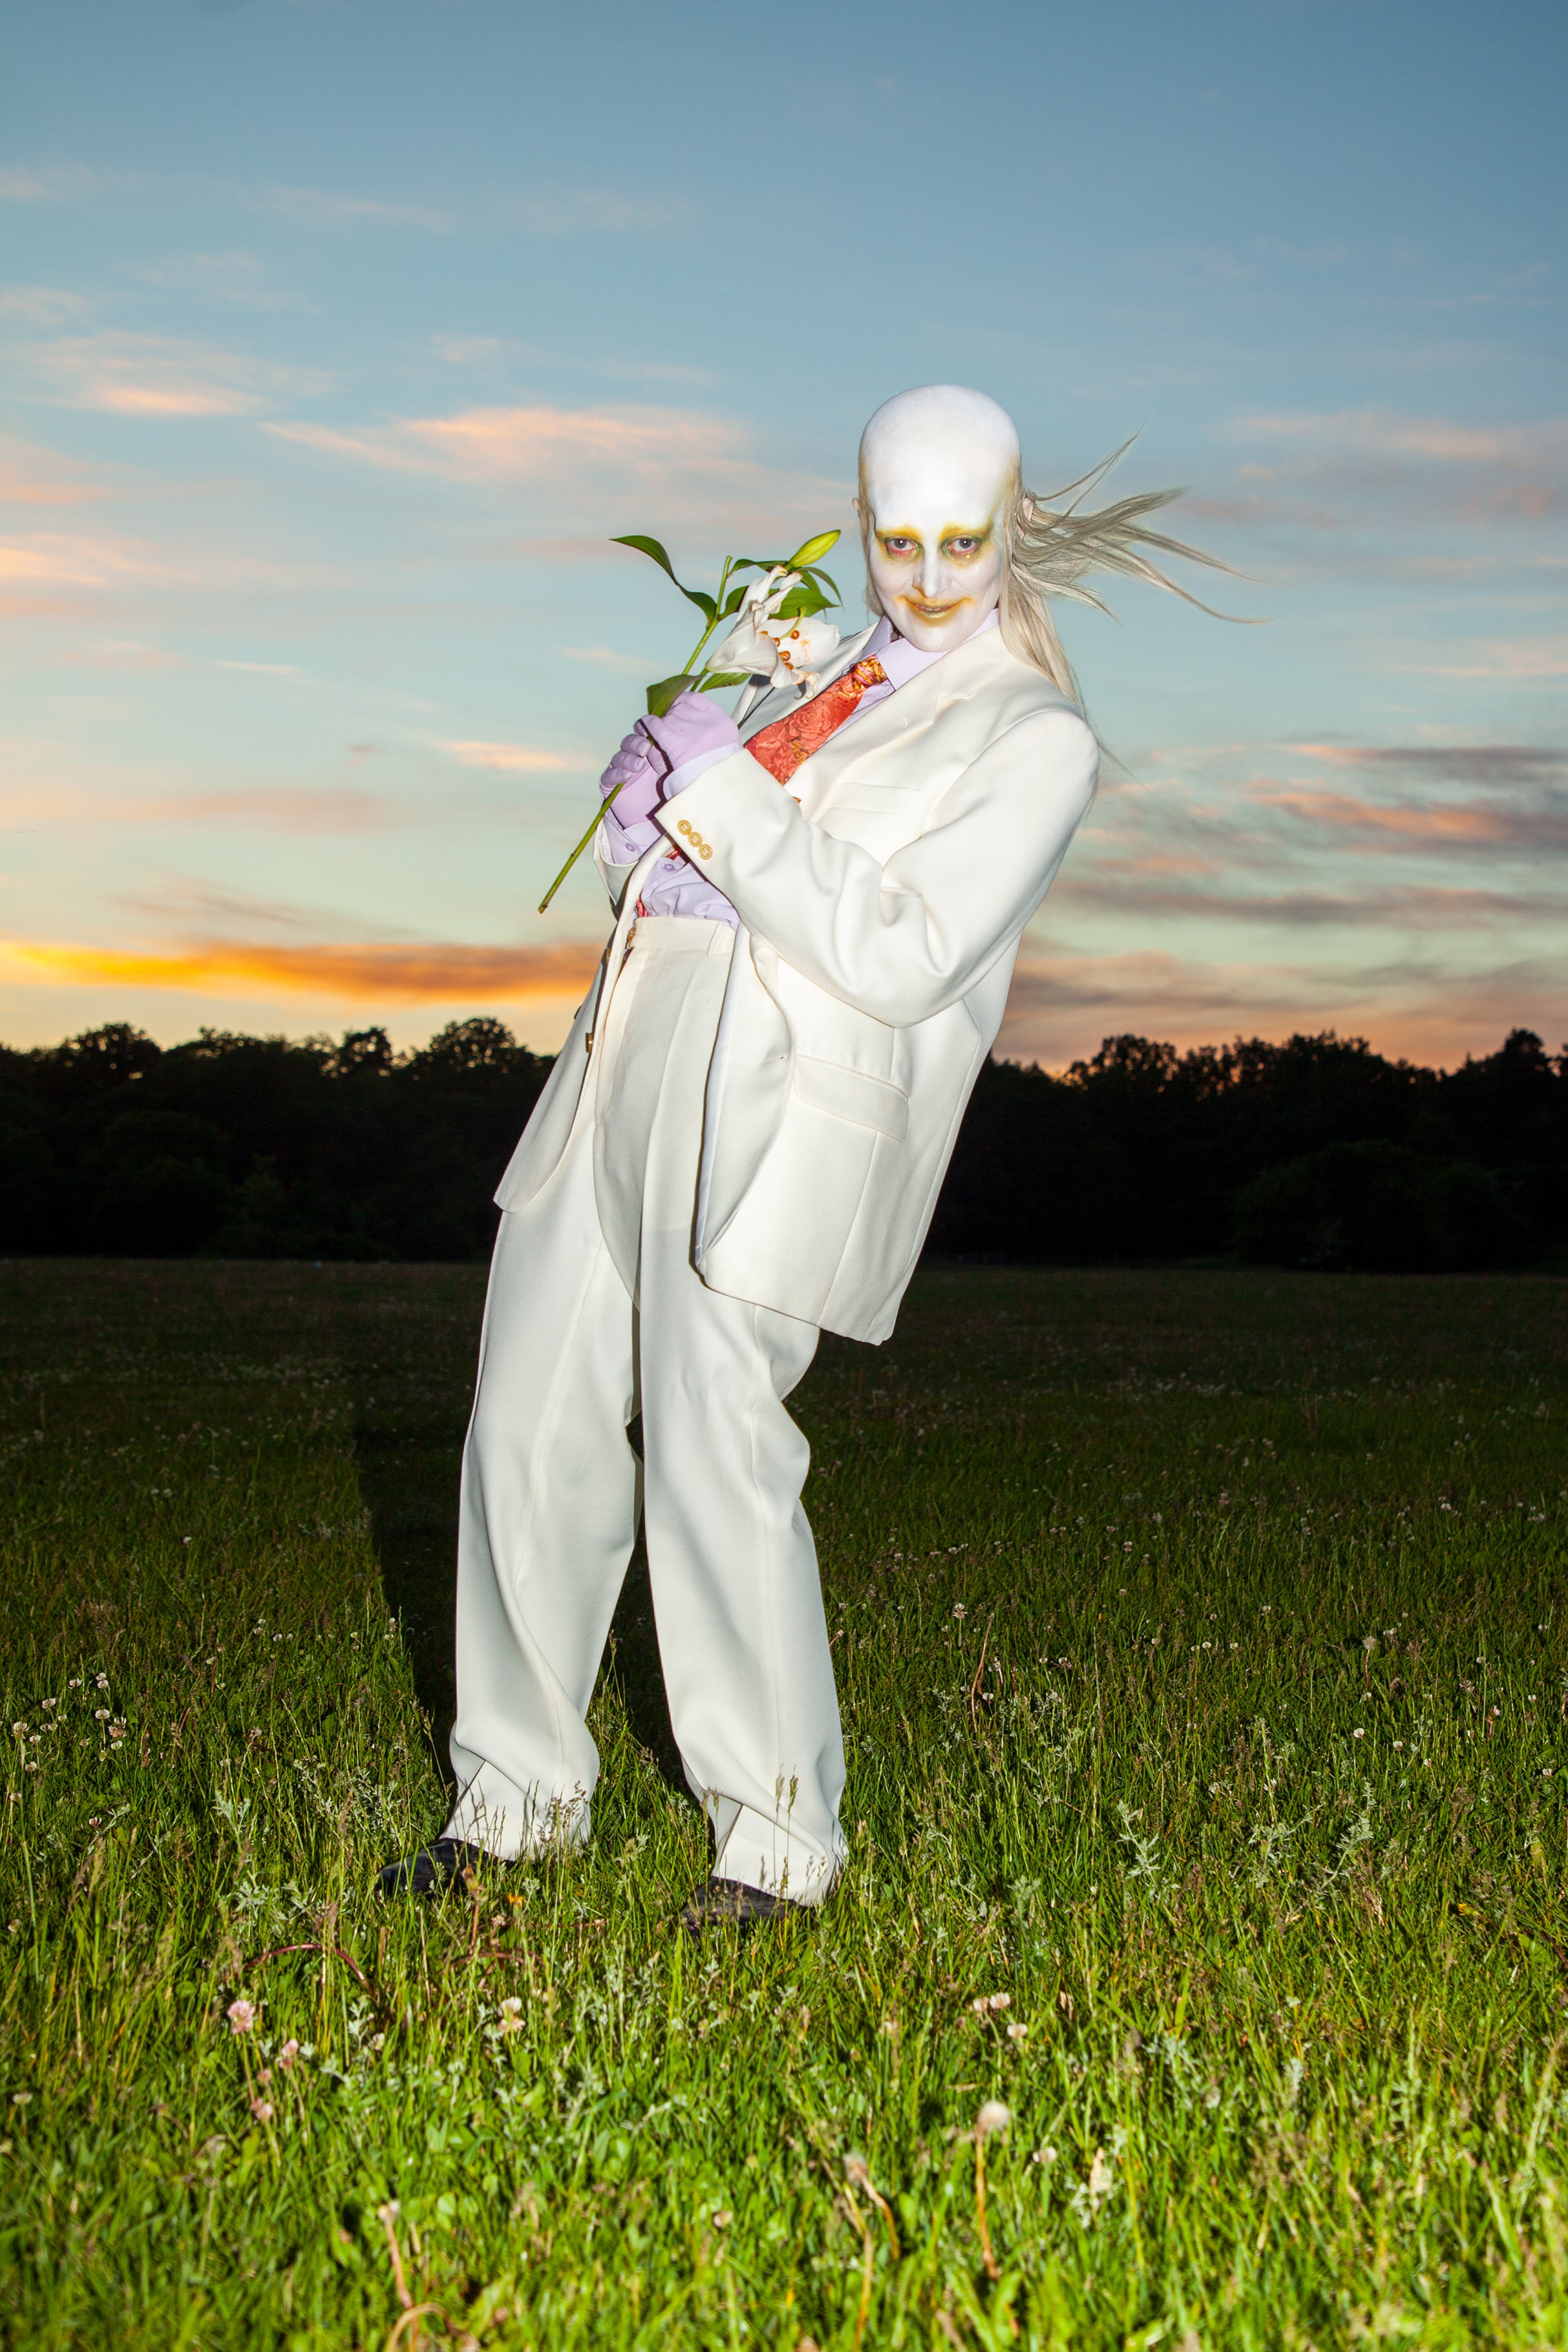 Fever Ray - Fall 2023 Tour With Special Guest Christeene presale code for legit tickets in Denver